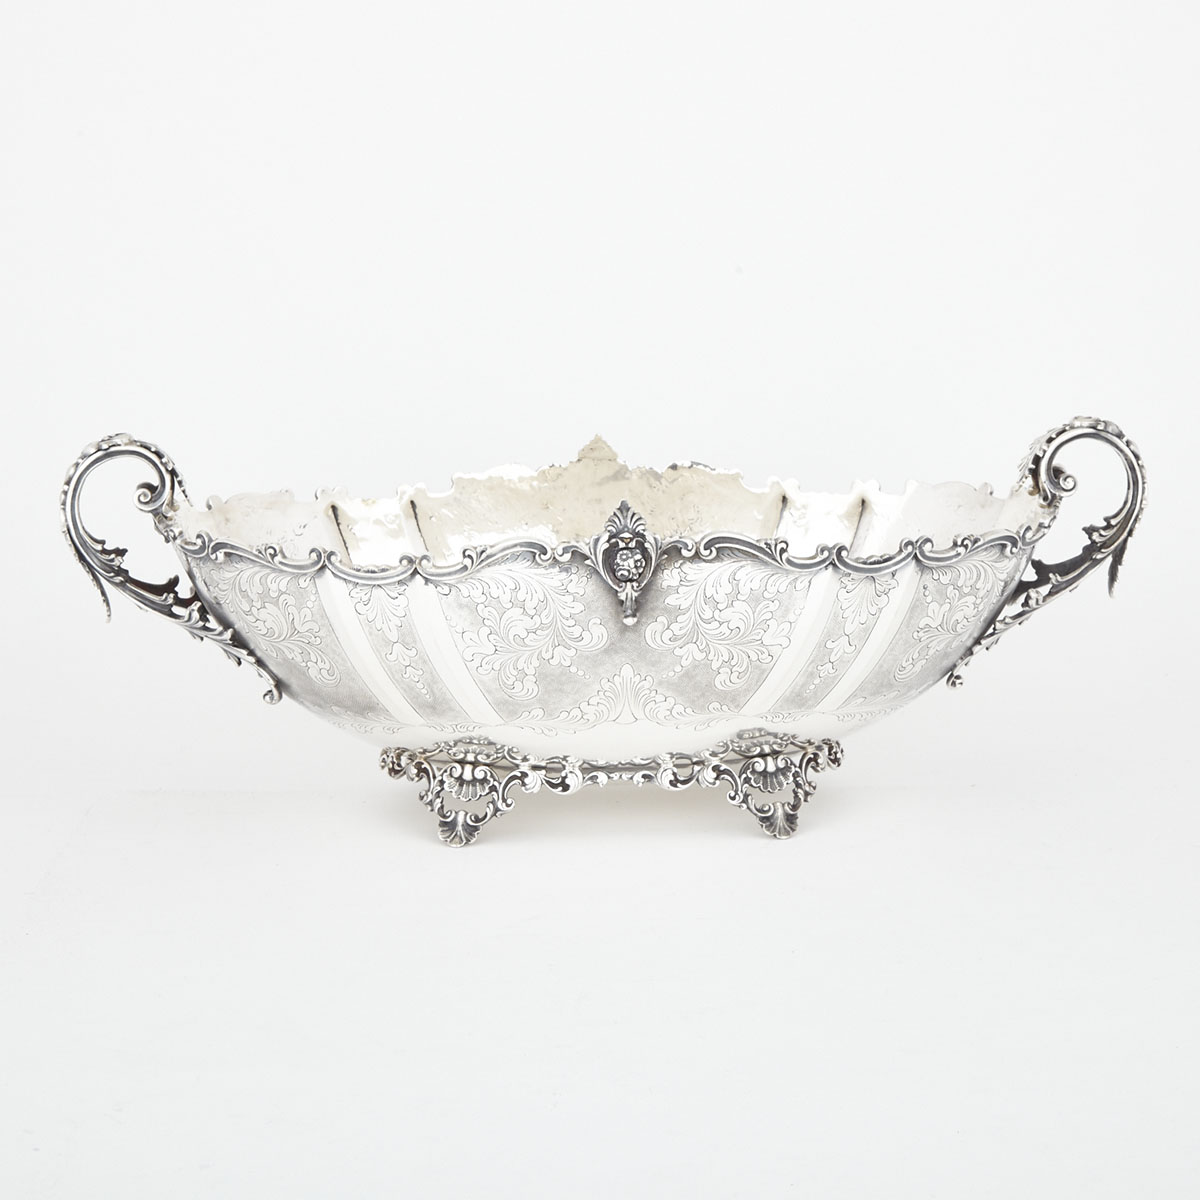 Italian Silver Two-Handled Oval Centrepiece, 20th century